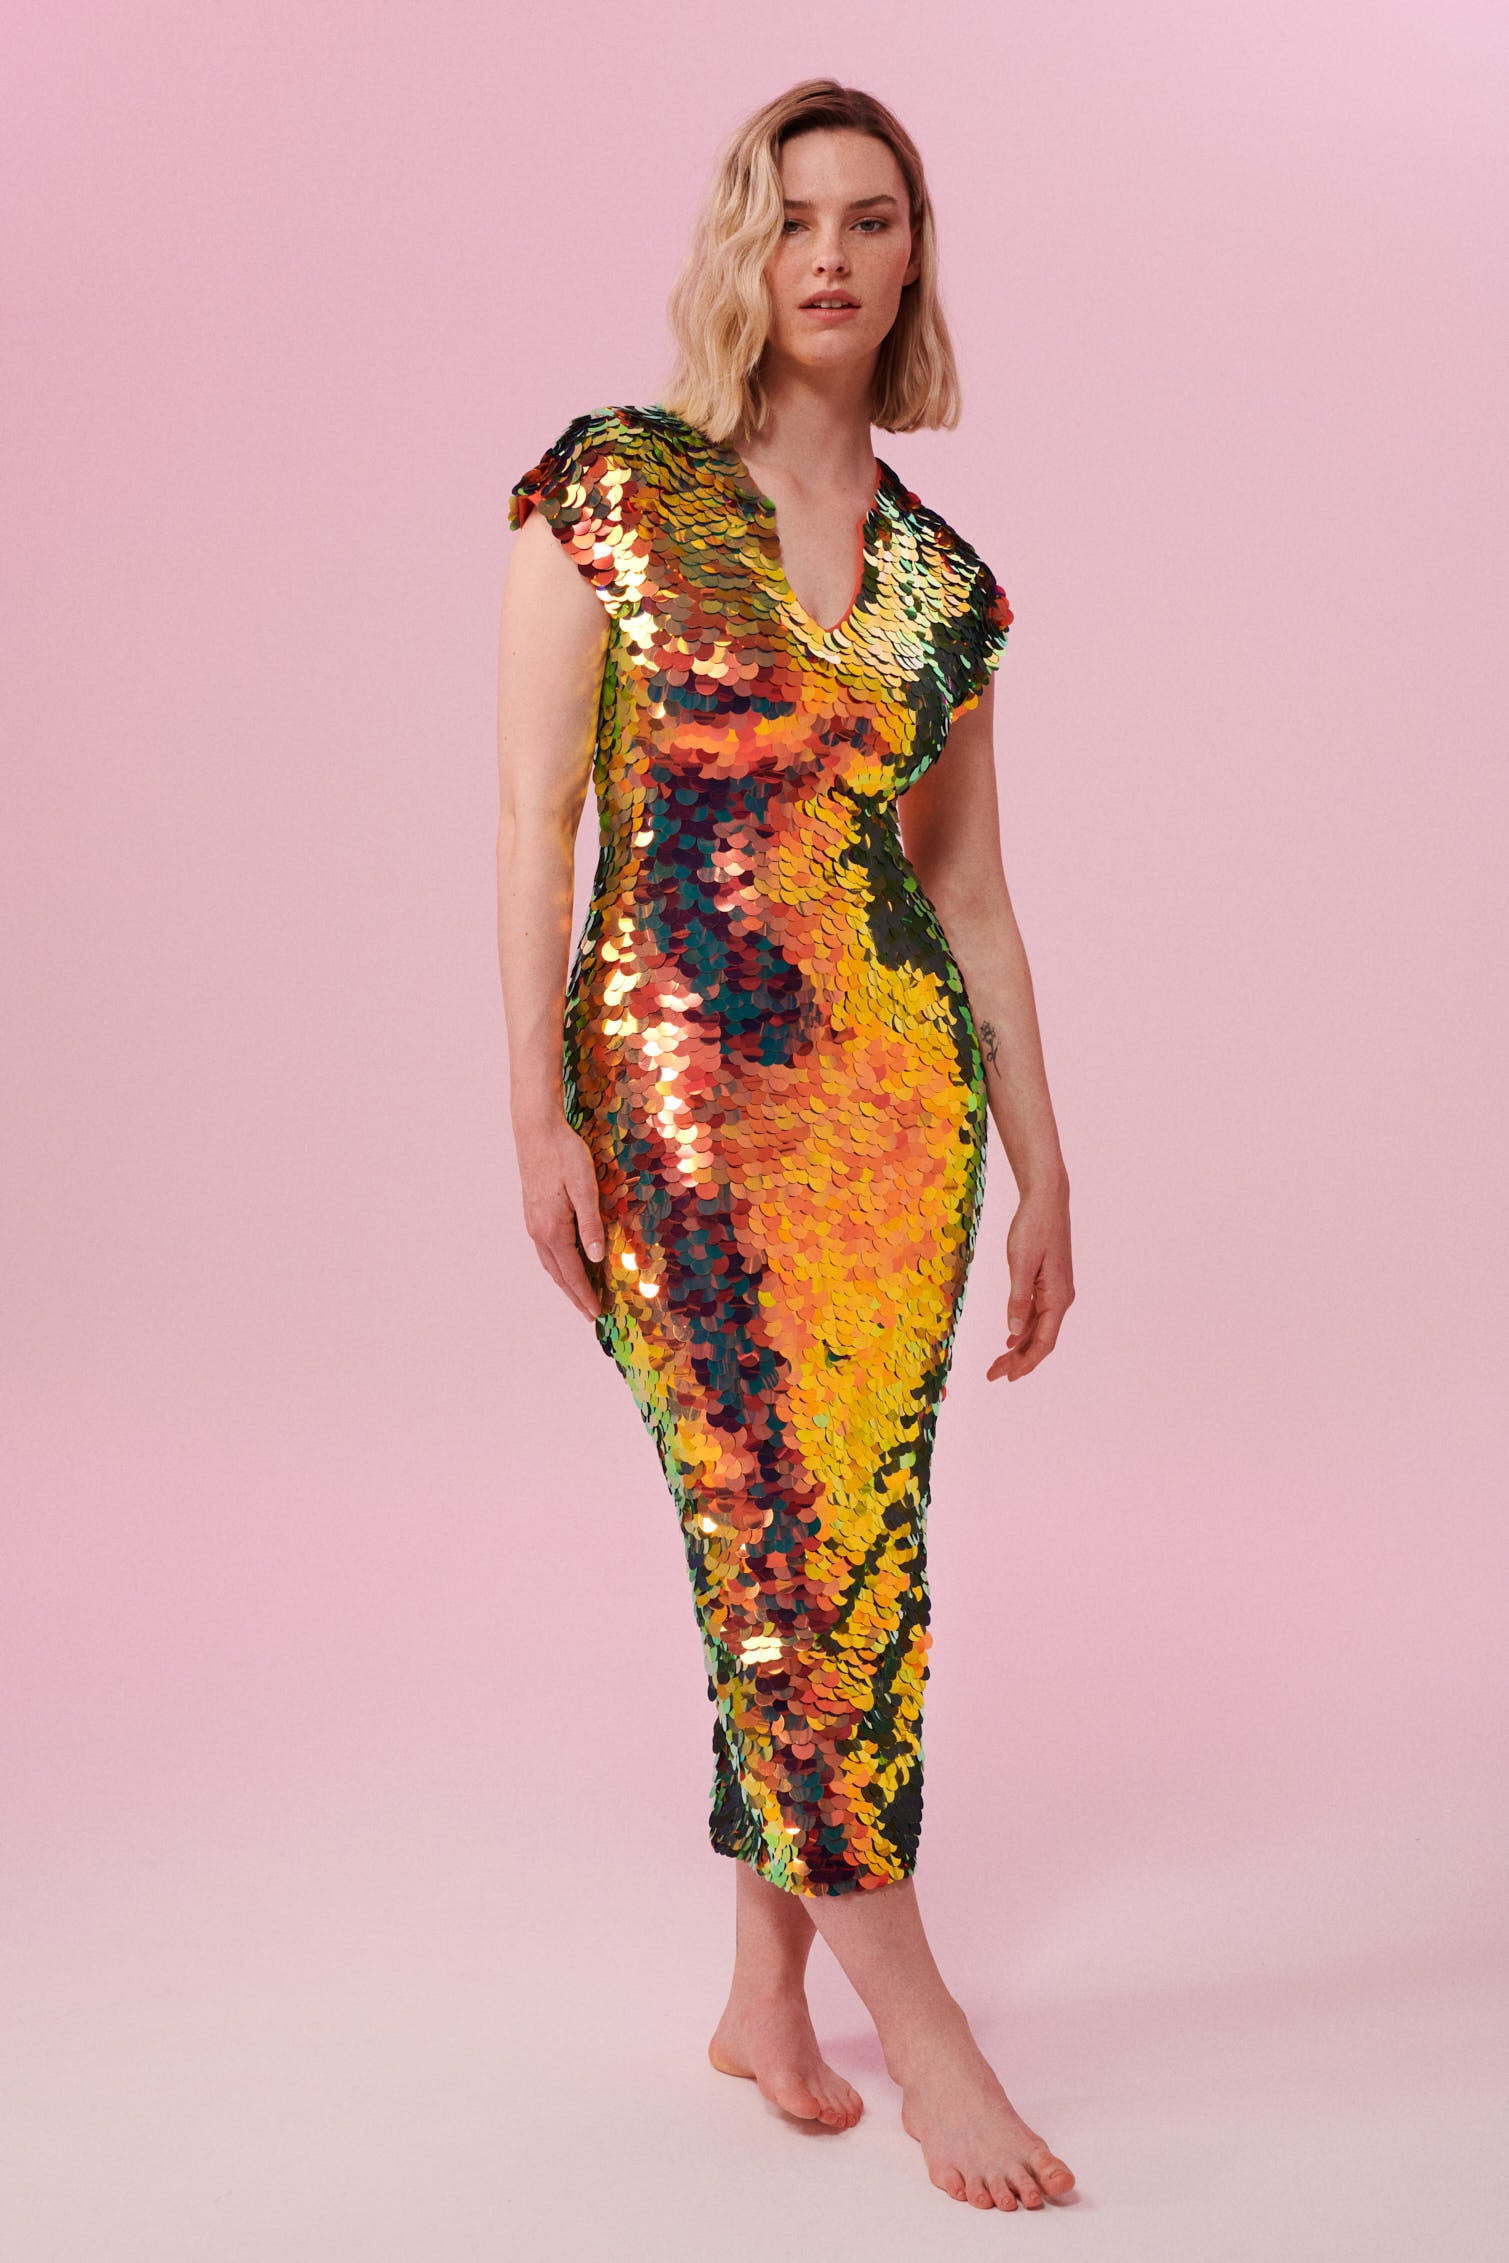 A woman with short blonde hair standing facing the viewer wearing an iridescent golden sequin long dress. A figure hugging  dress down to the ankles with small capped sleeves completely covered in large round holographic Rosa Bloom sequins. The sequins glisten, creating a mix of shimmering colours of burnt orange, yellow, gold and warm red making this sequin dress glow when worn.